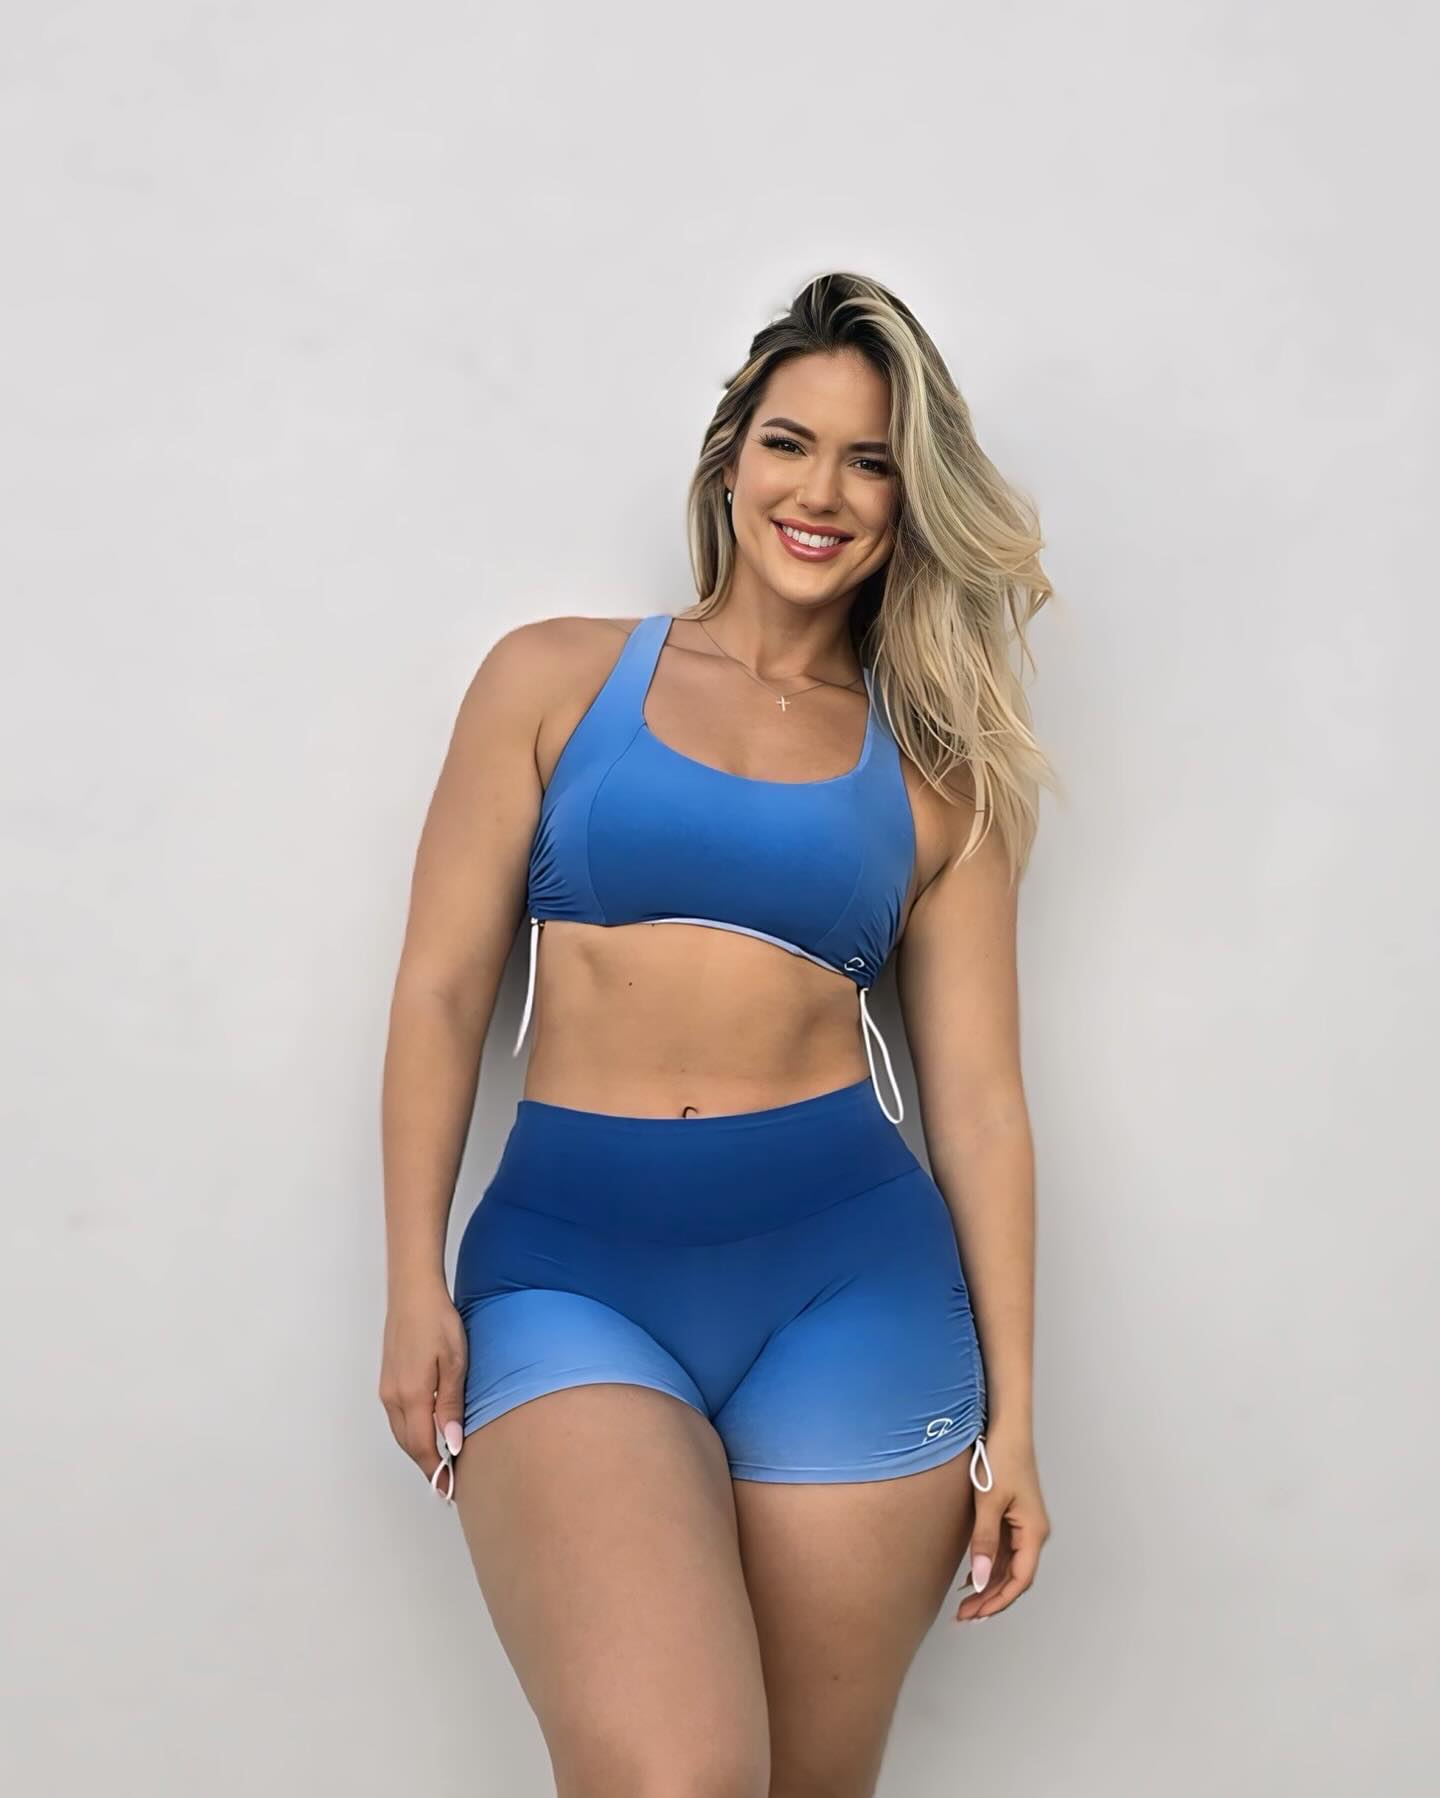 @bombshellsportswear New Ombré Collection drops this Friday 5/3 at 6am PST 🩵💙

use the support link in my bio to shop 🛒